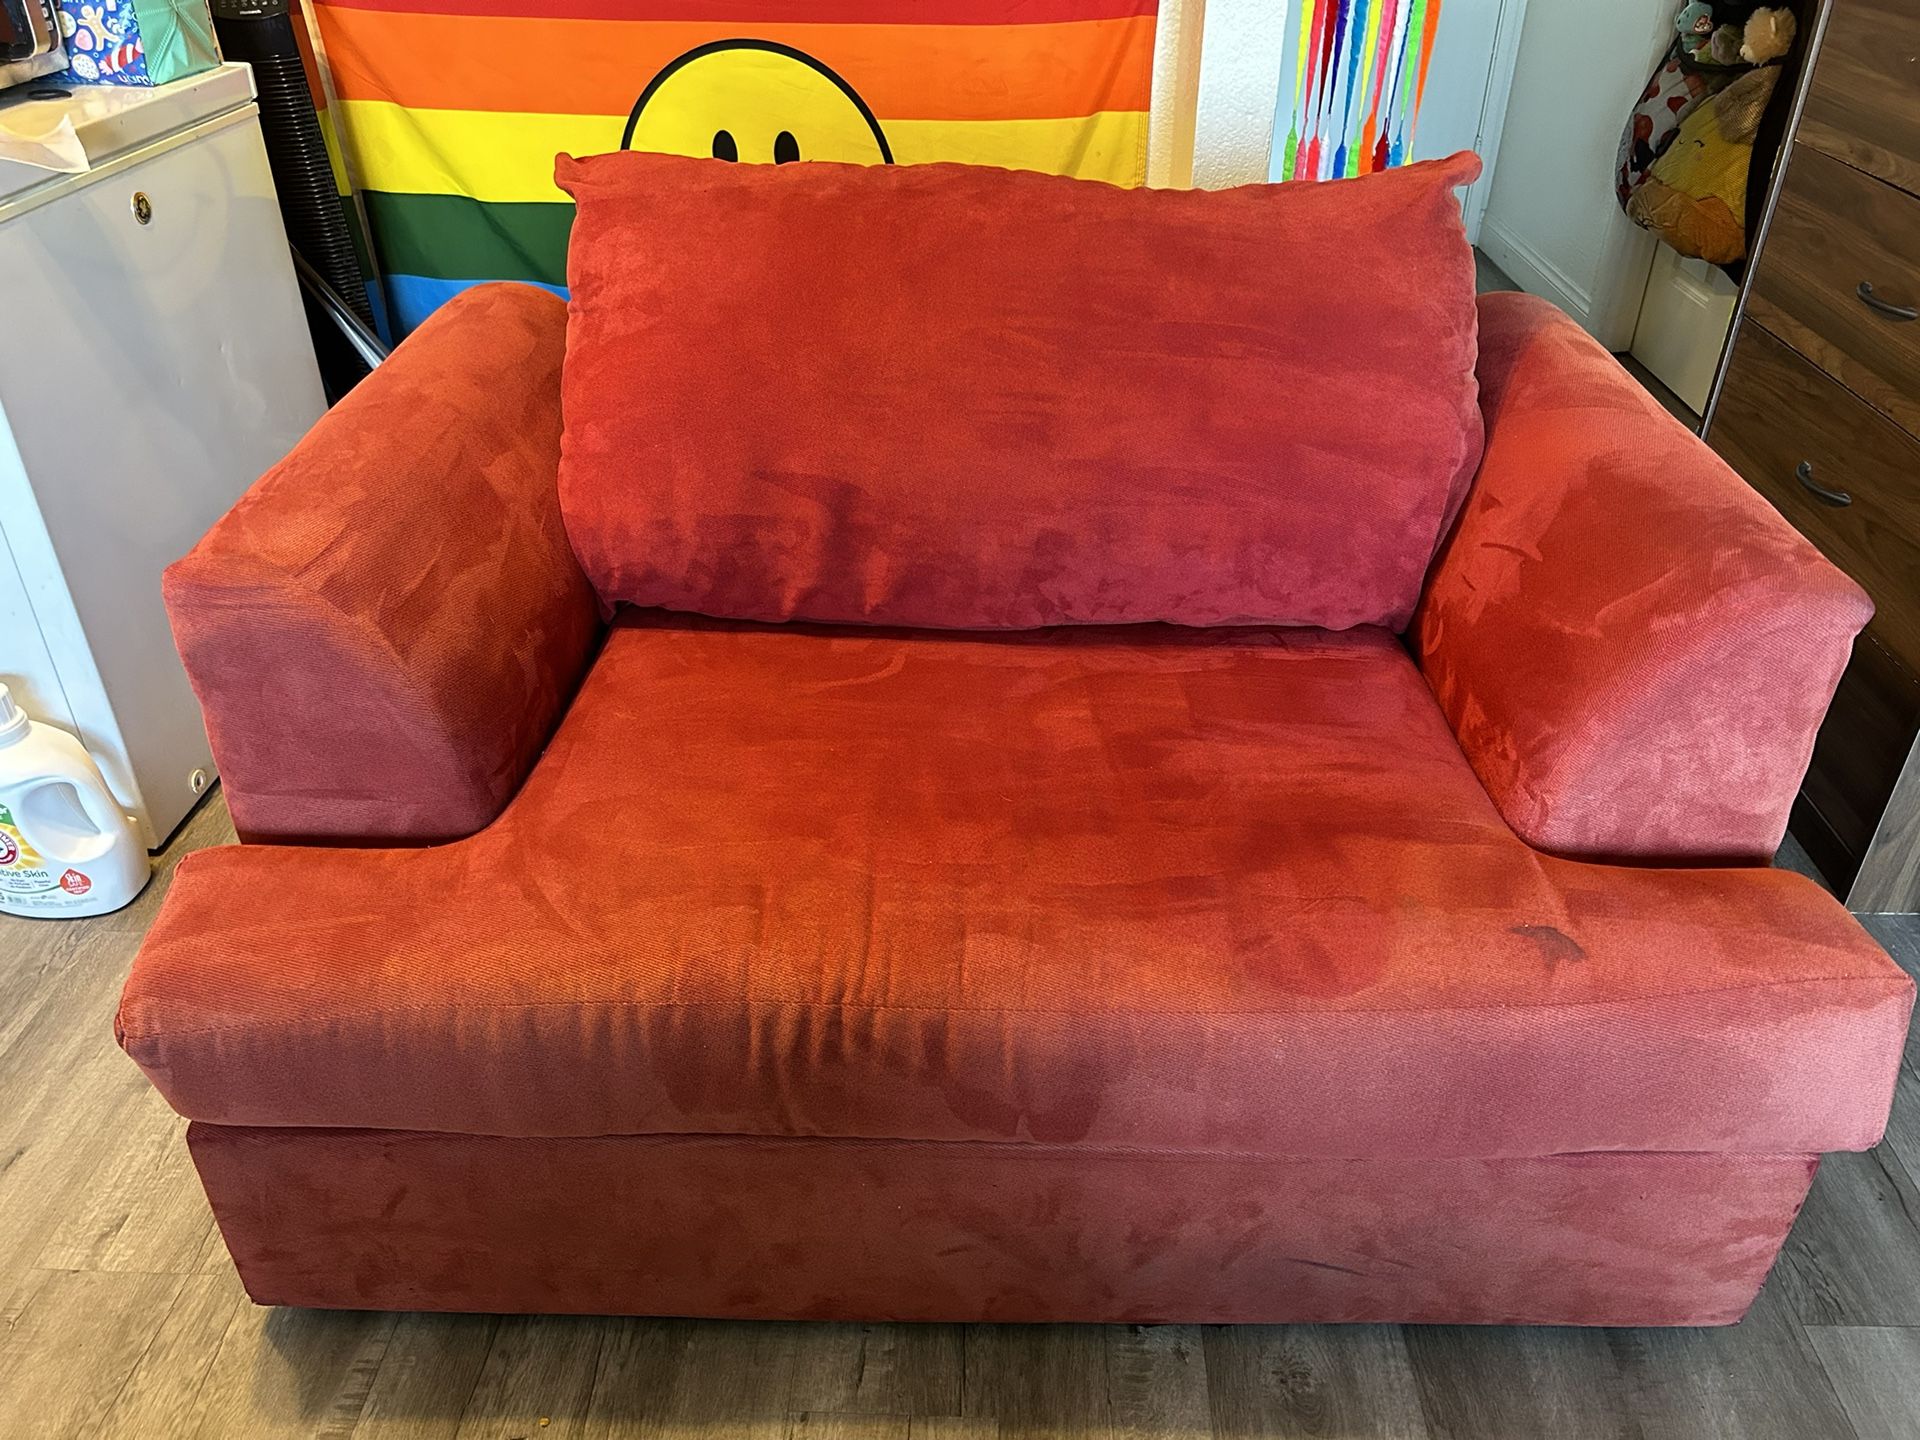 Big Red Couch- $200 OBO